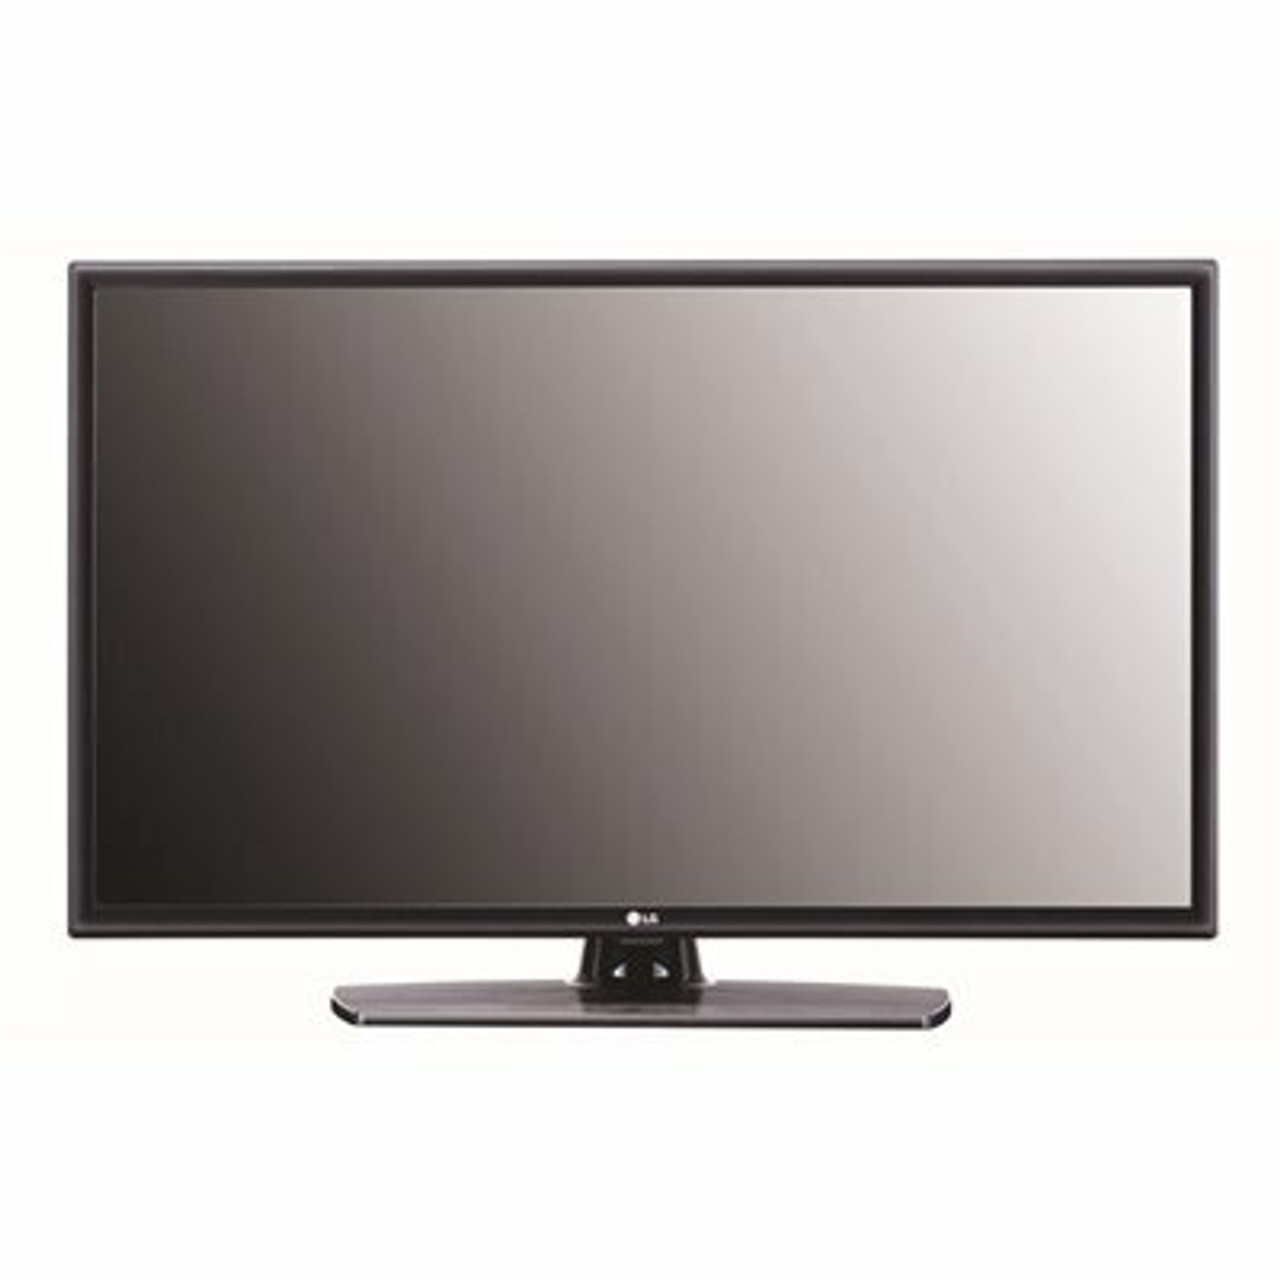 Lg Electronics 32 In. Hospitality Class Led 720P 60 Hz Hdtv With Pro:Idiom And B-Lan